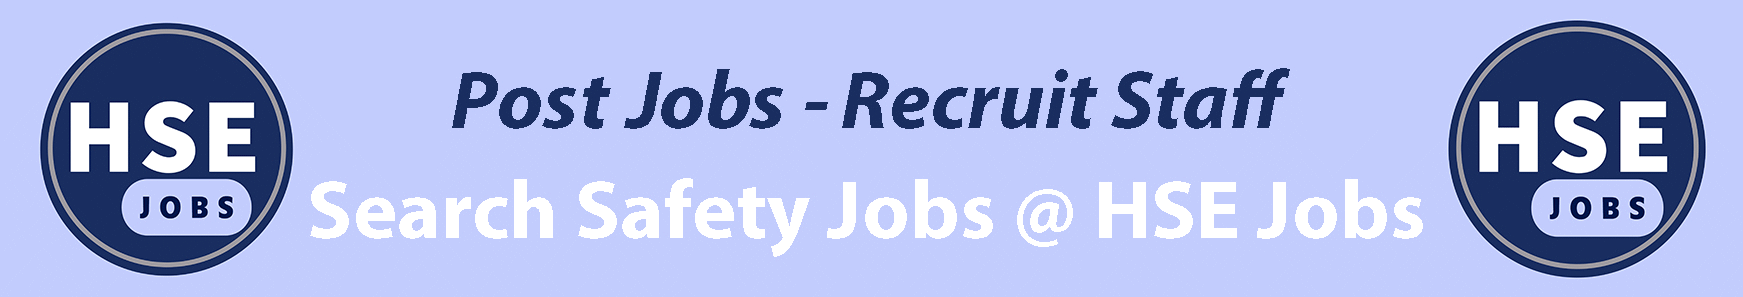 HSE Jobs - Health and Safety Jobs